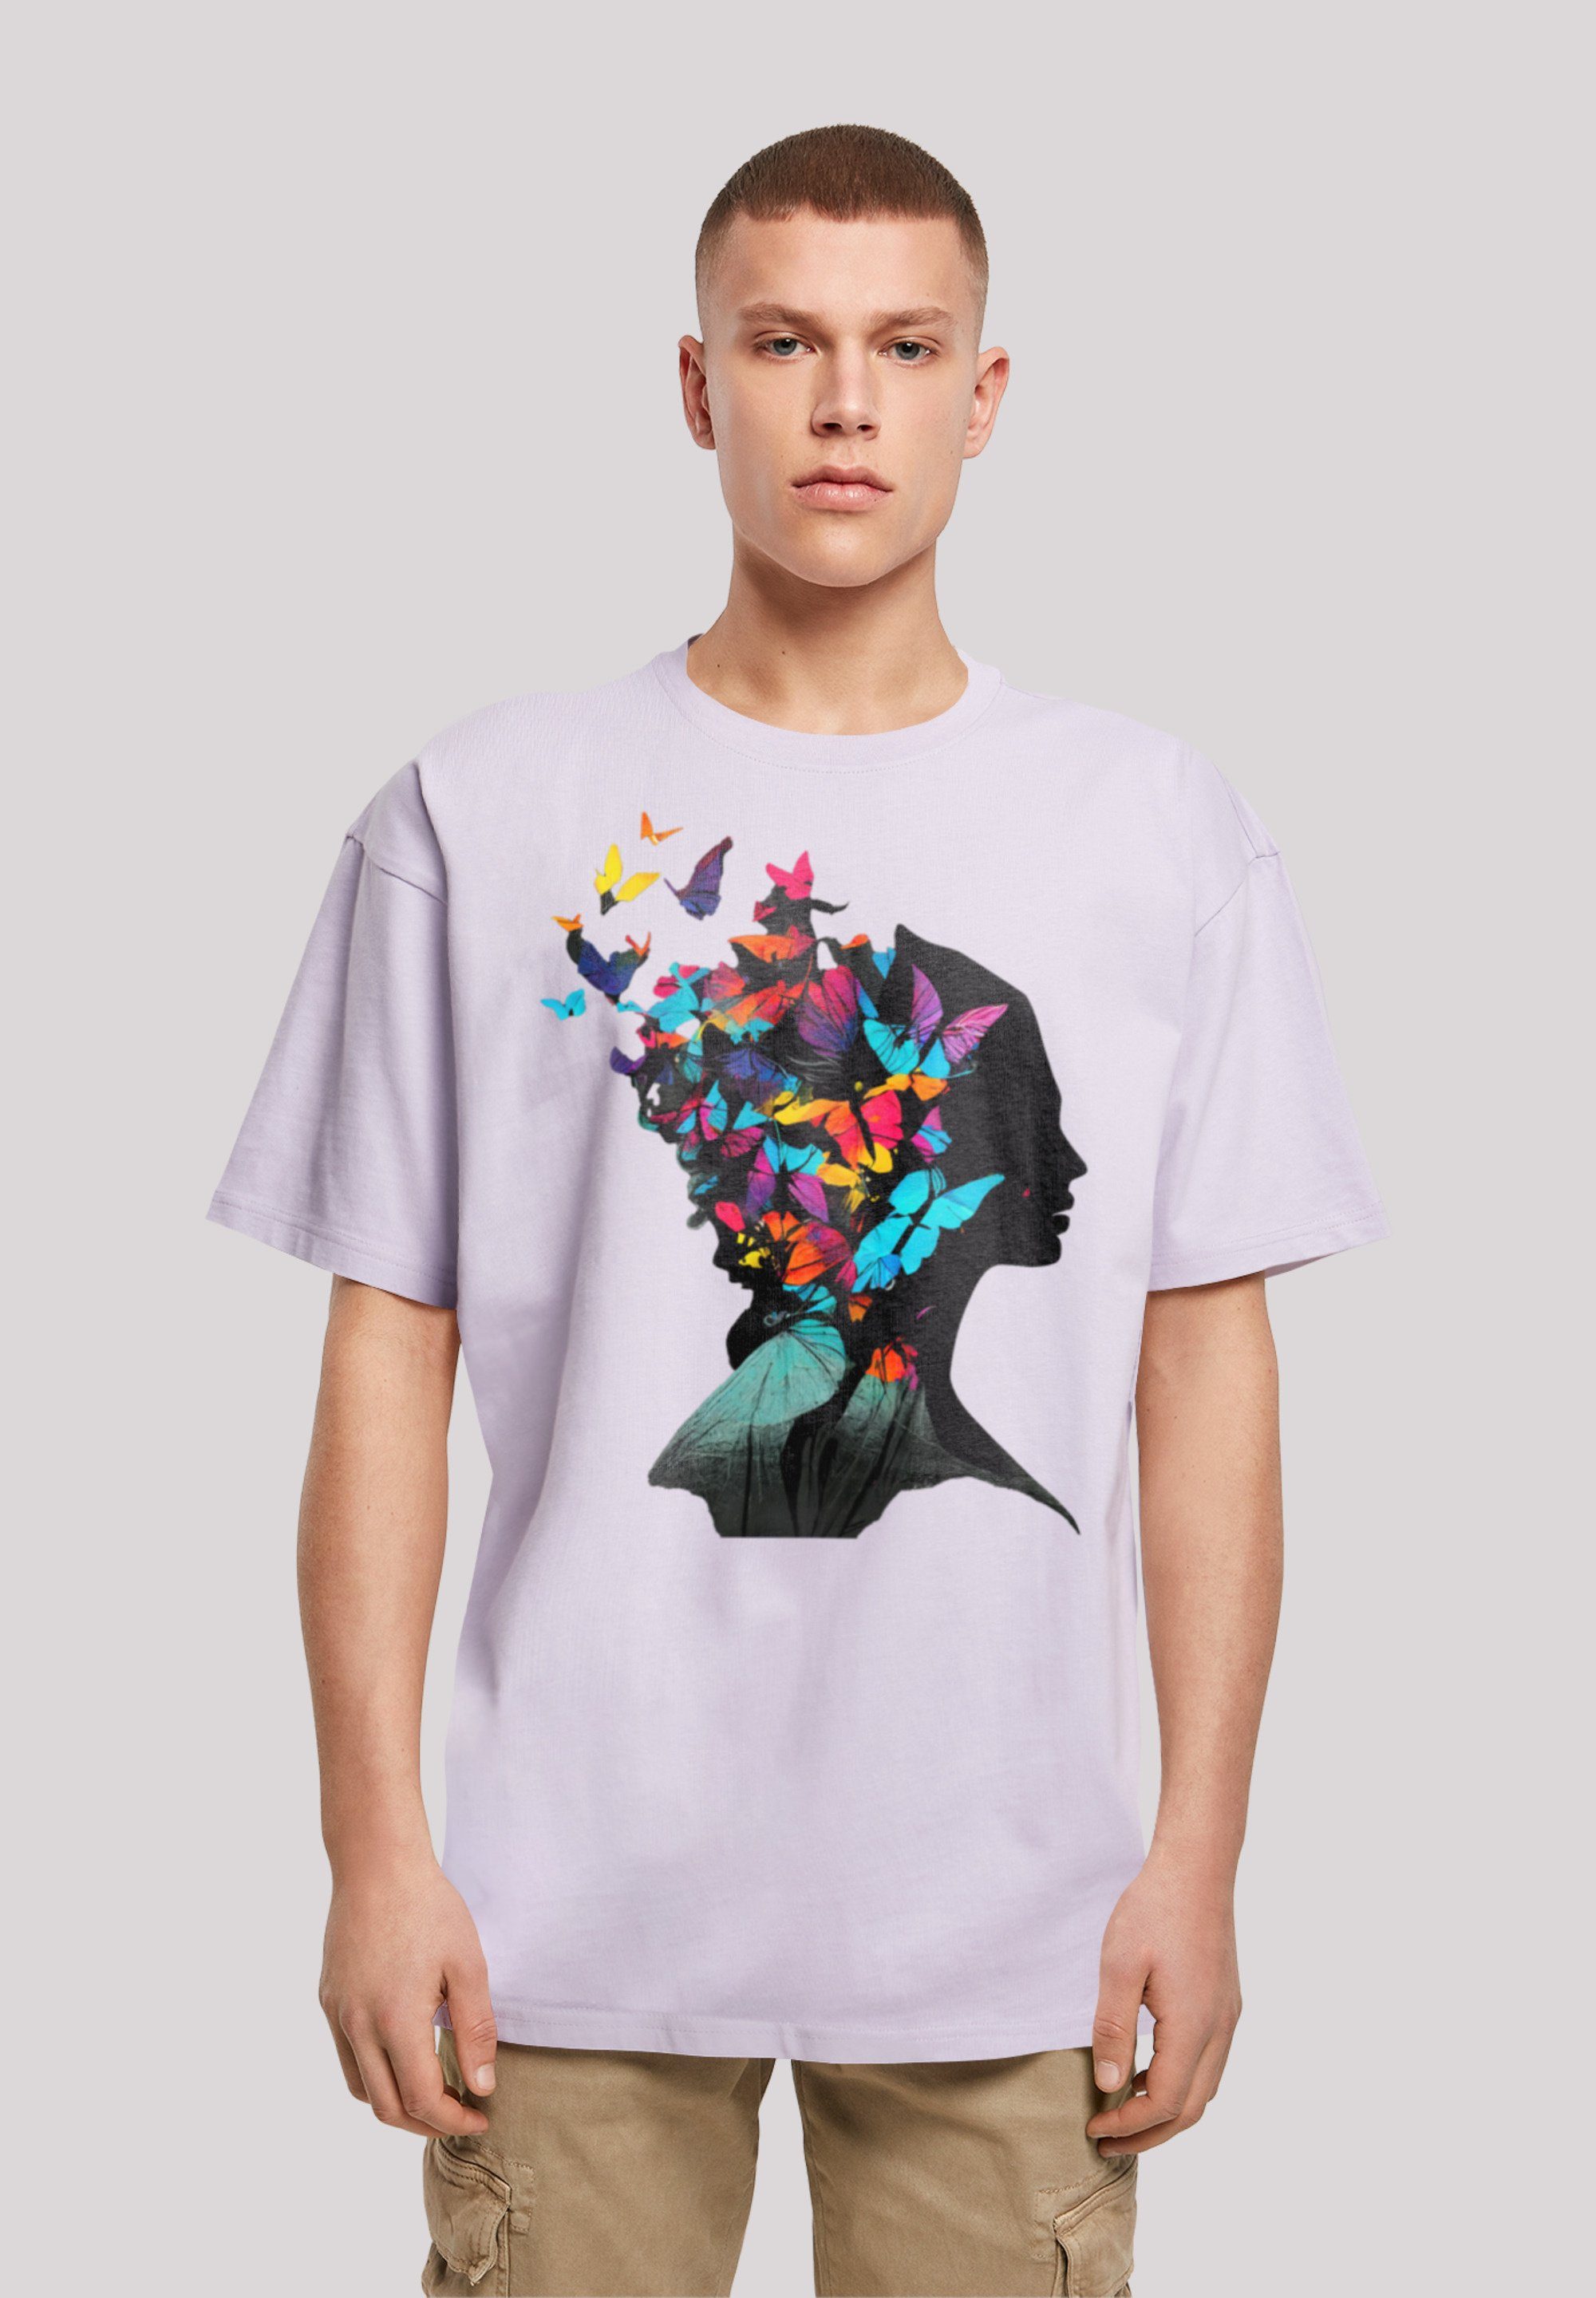 F4NT4STIC T-Shirt Schmetterling Silhouette OVERSIZE TEE Print lilac | T-Shirts